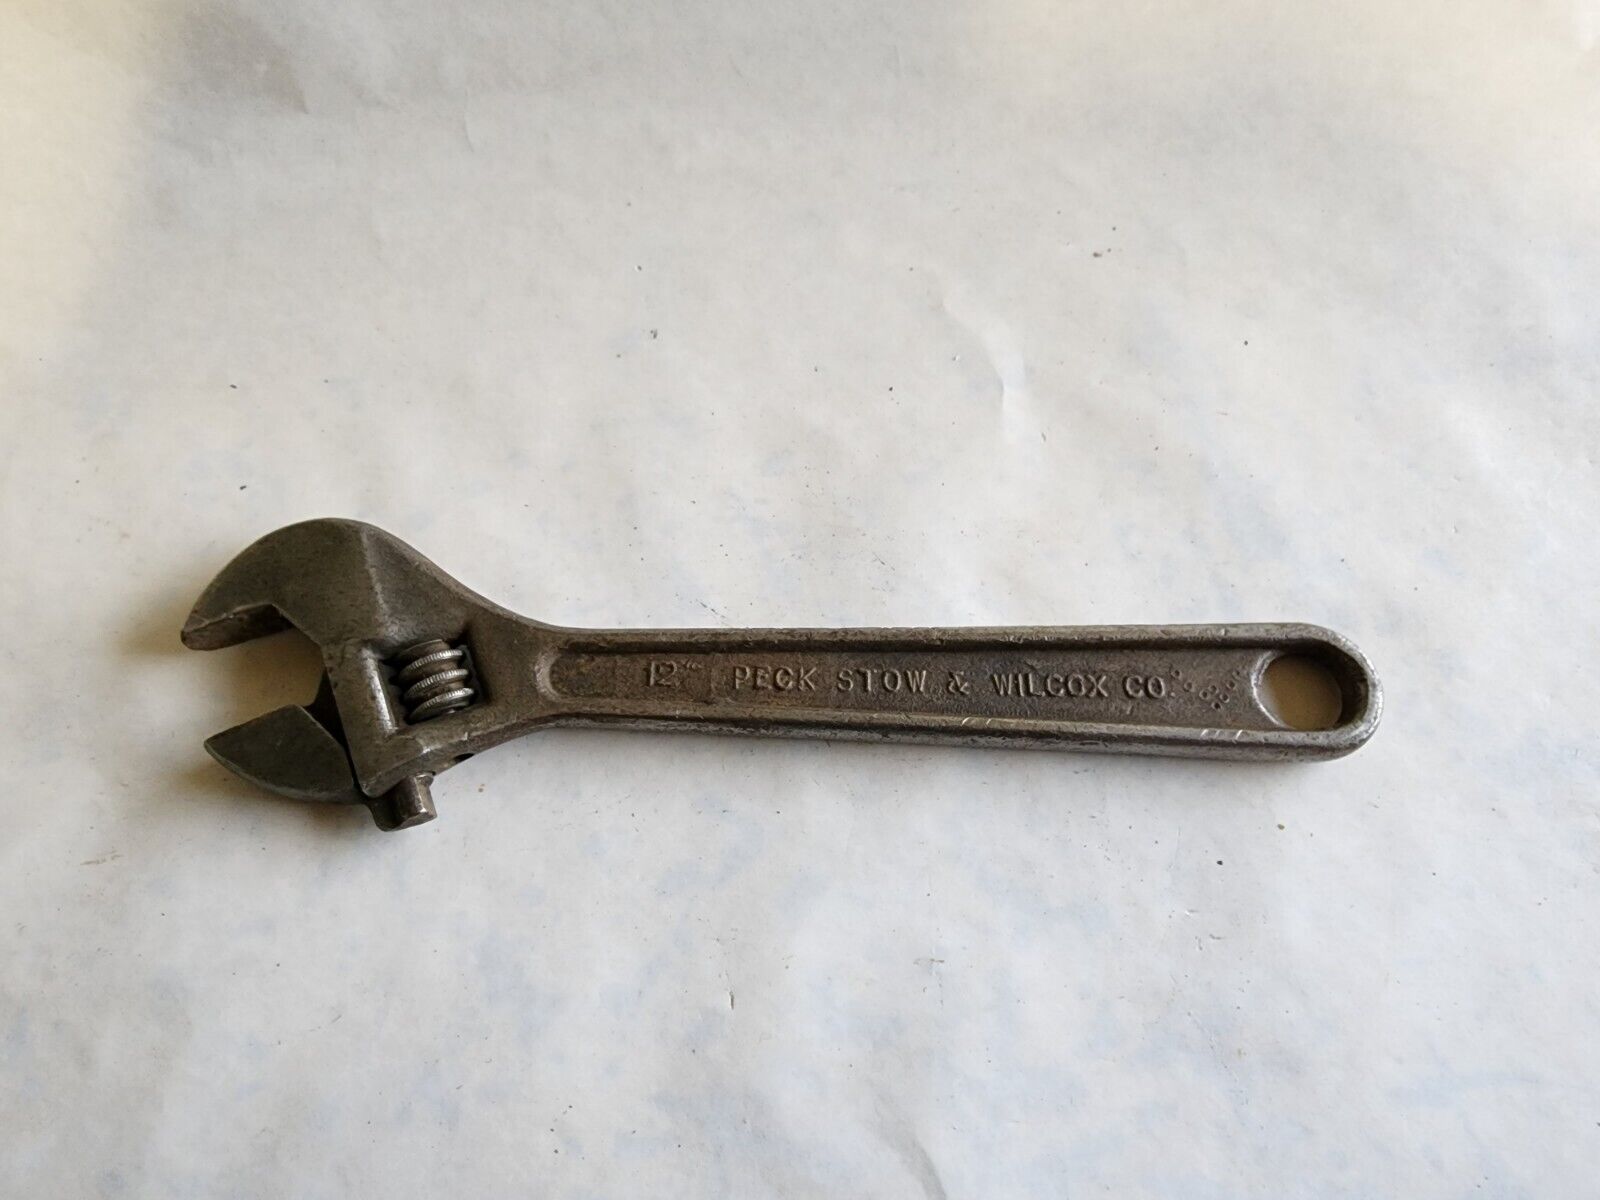 Vintage / Antique 12” Peck Stow & Wilcox Cresent Wrench 